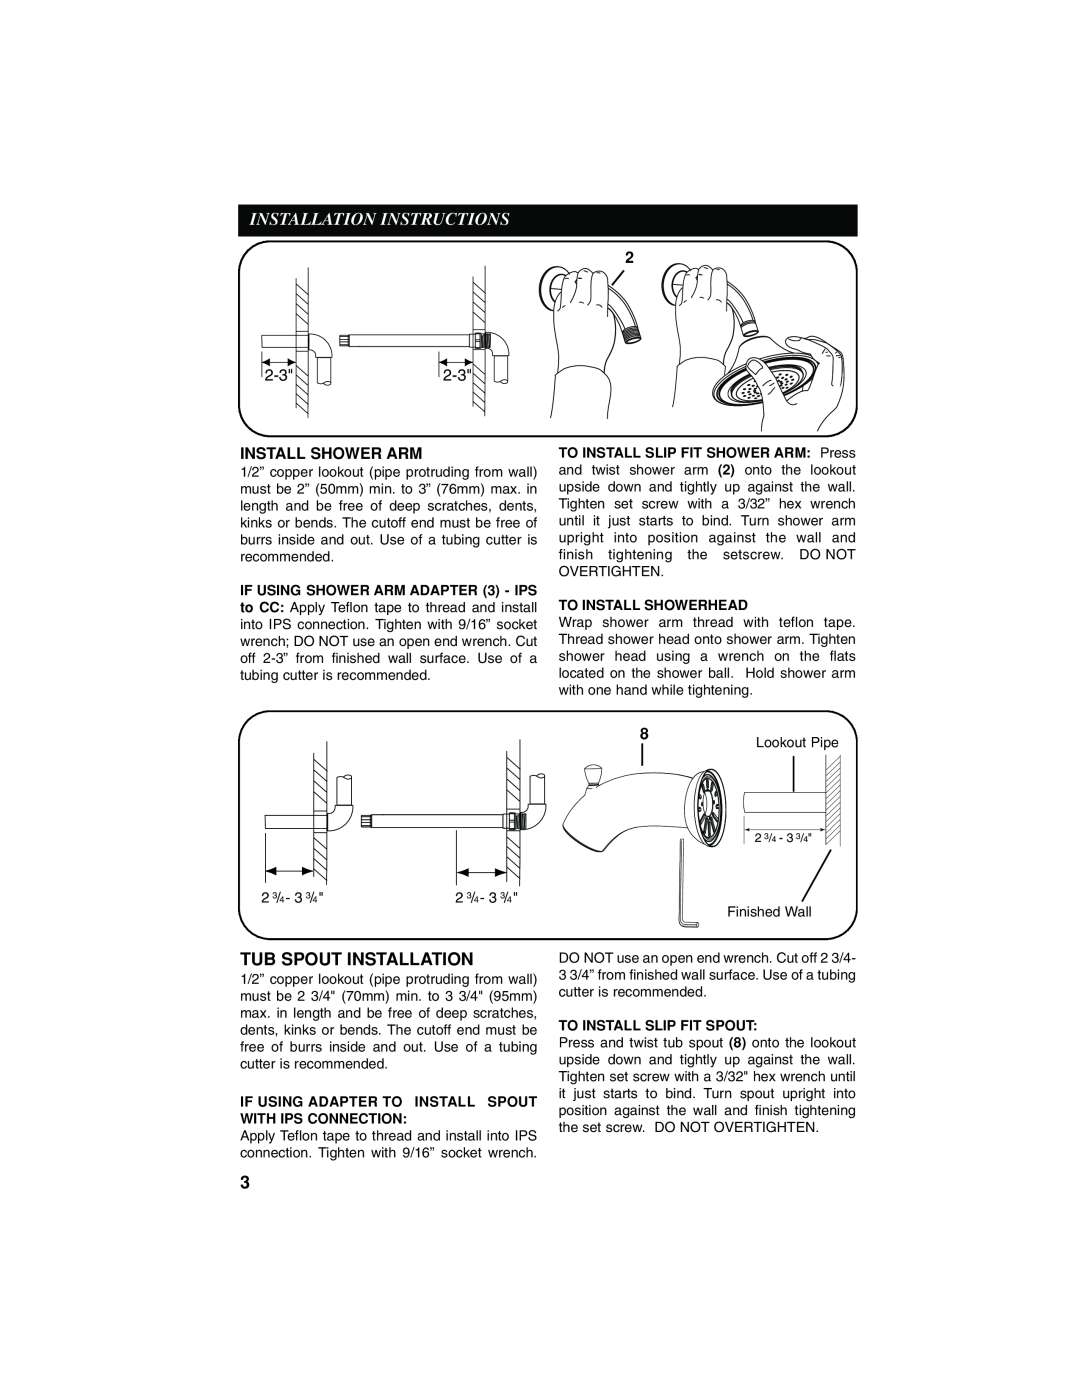 Moen INS235A manual Installation Instructions, Tub Spout Installation, Install Shower Arm 